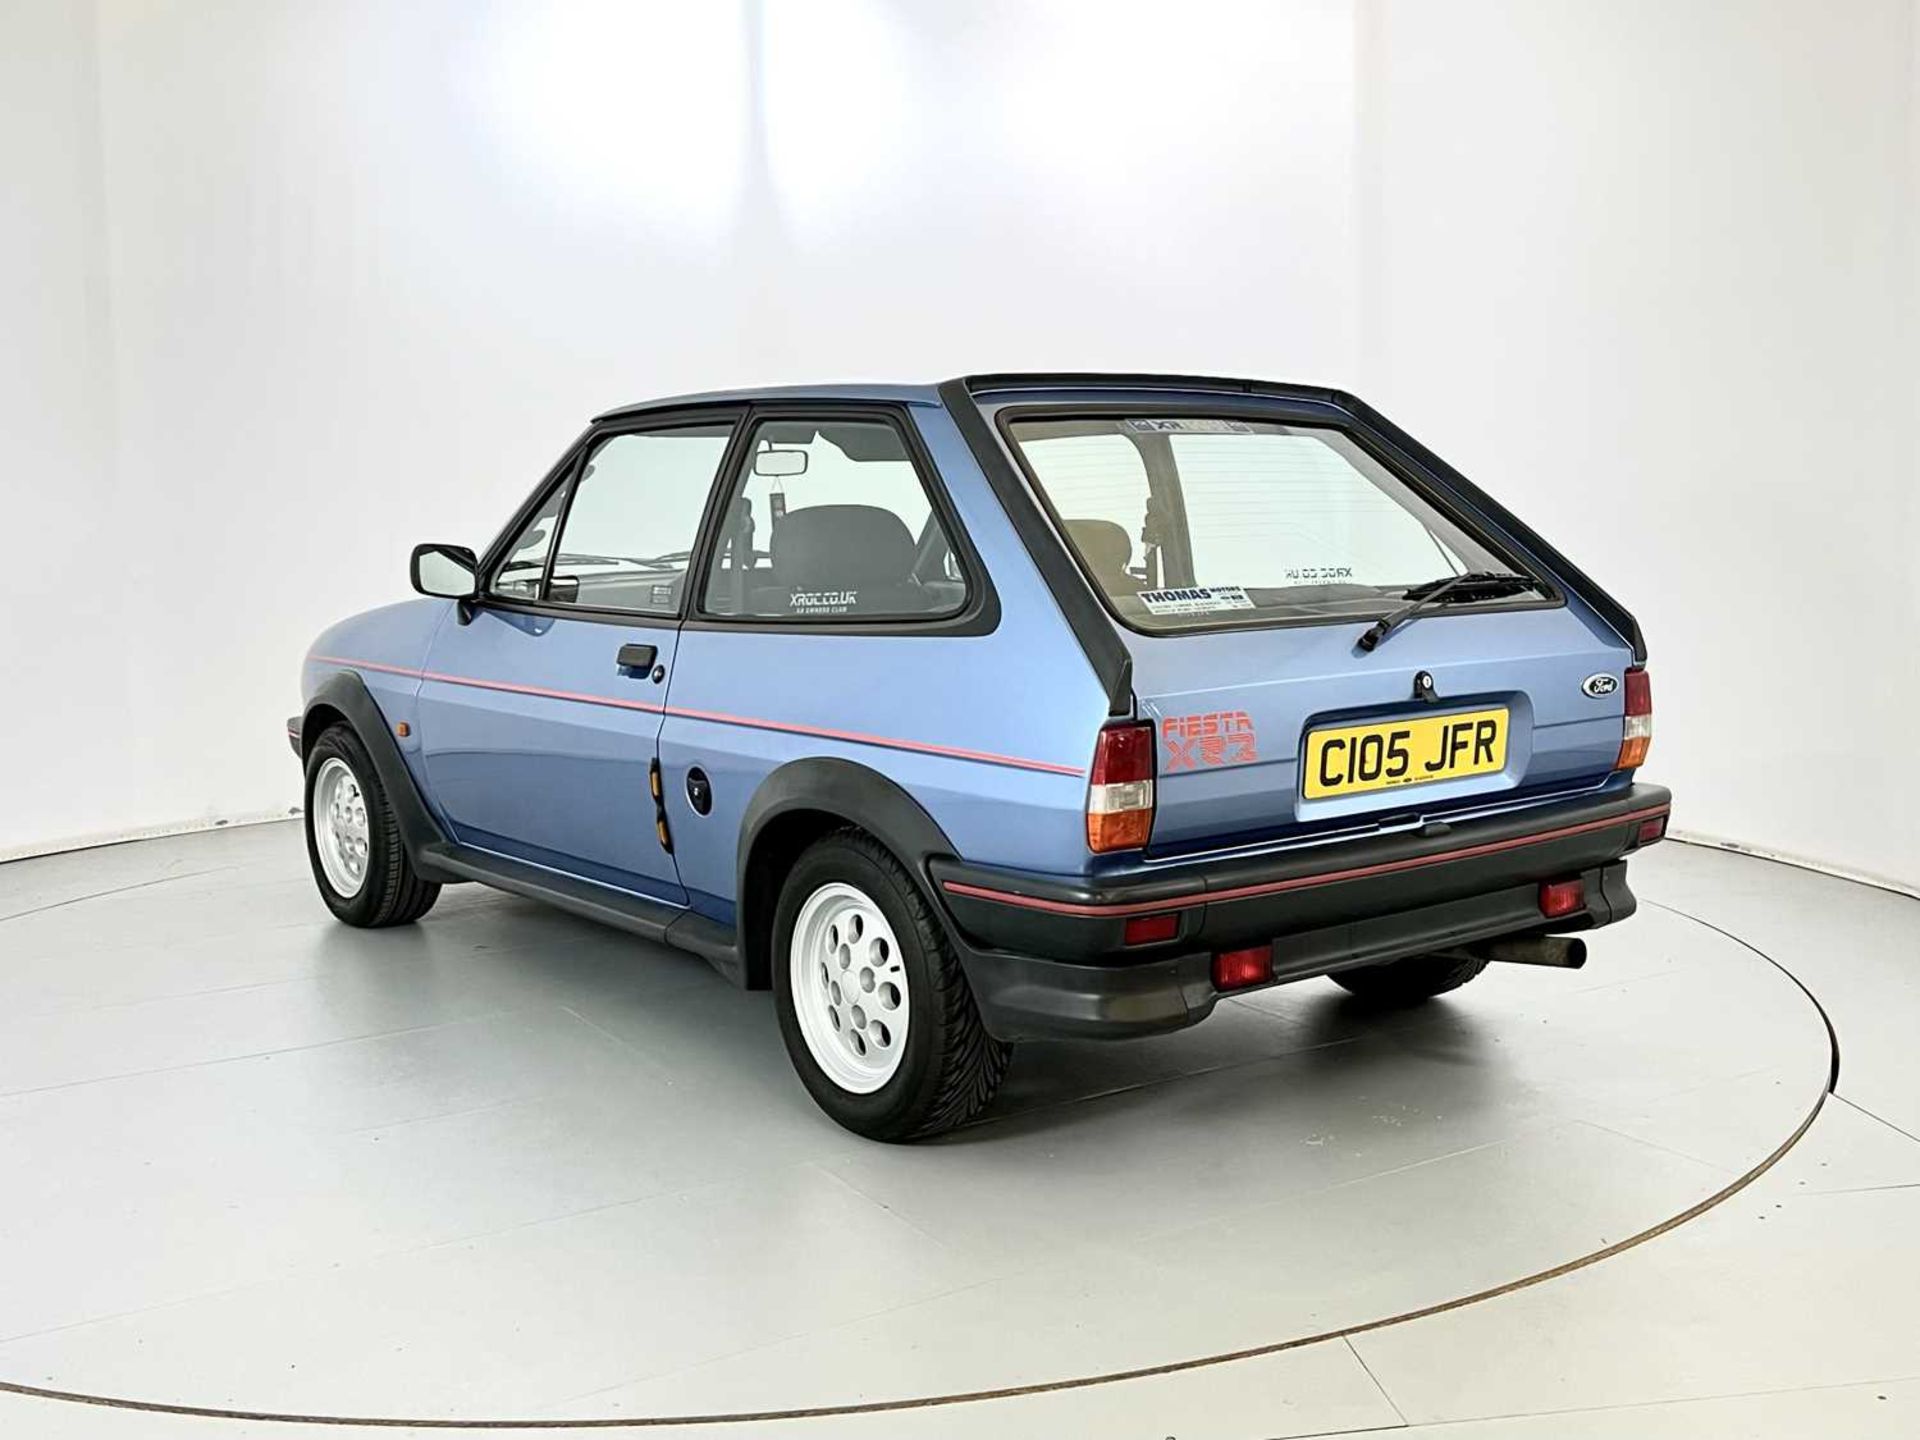 1986 Ford Fiesta XR2 - Image 7 of 33